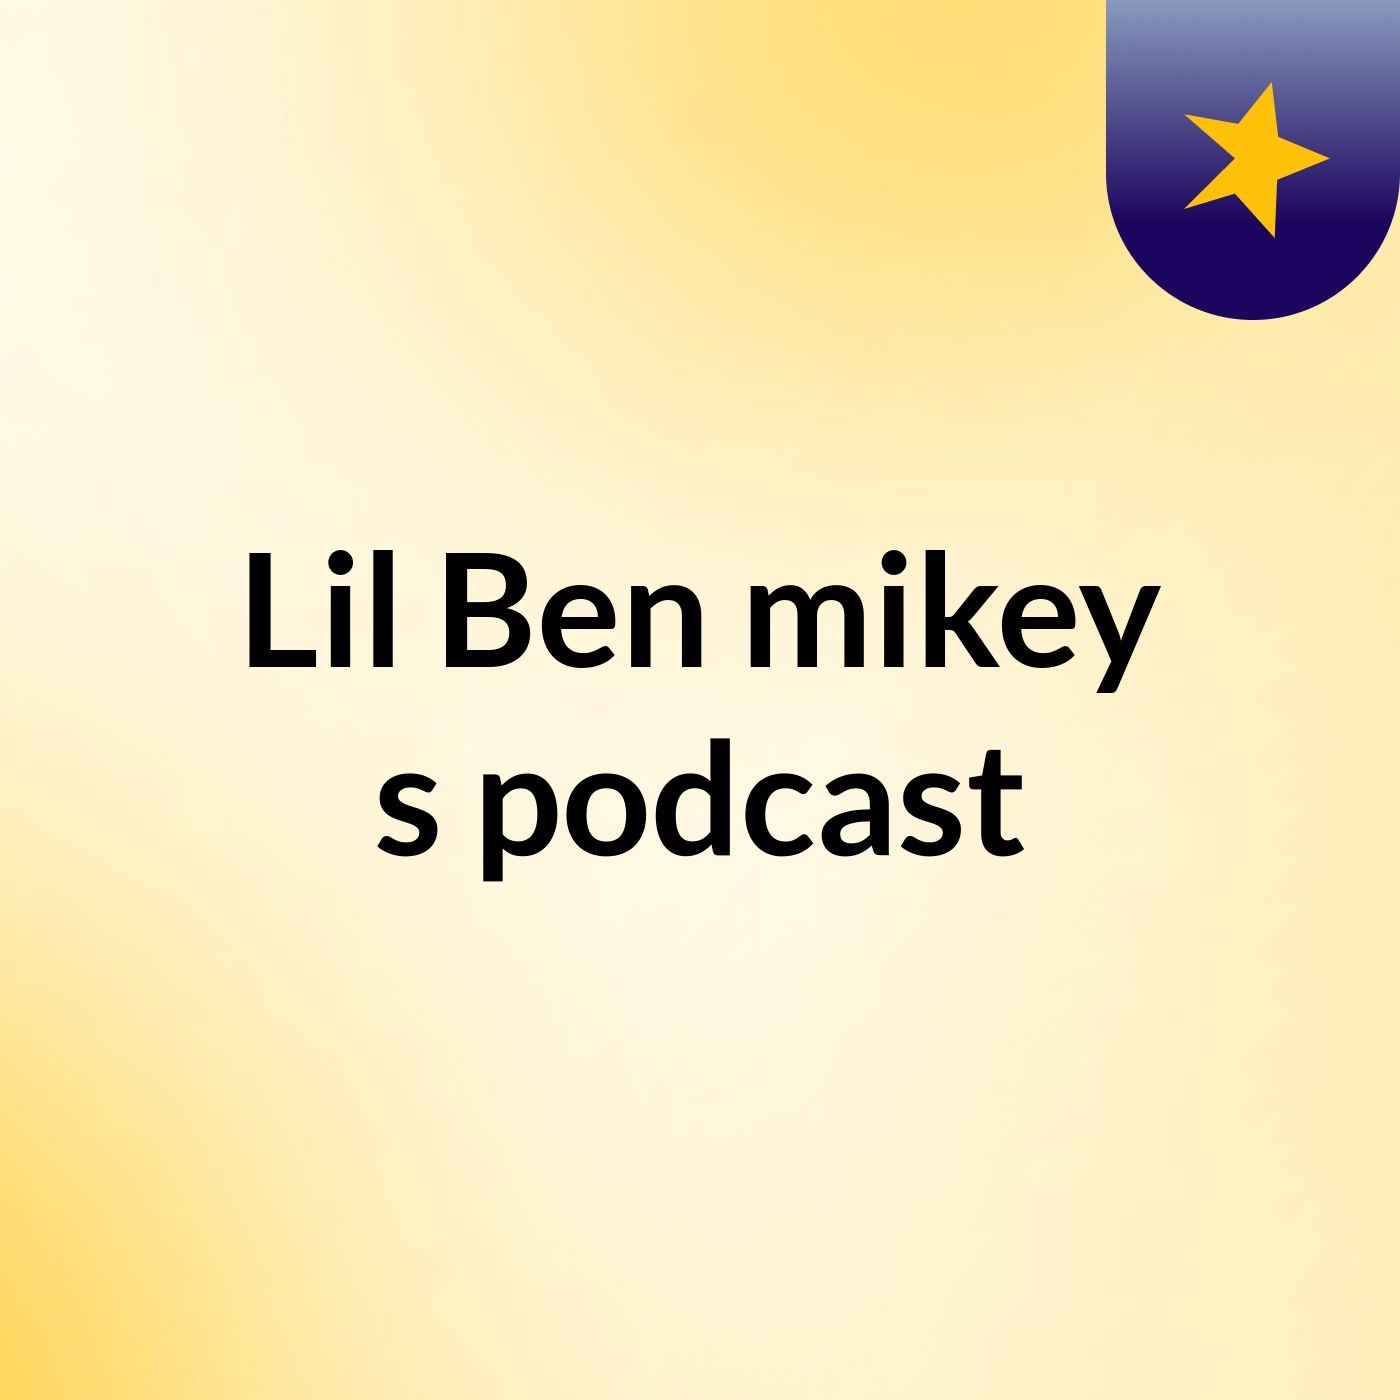 Lil Ben mikey's podcast